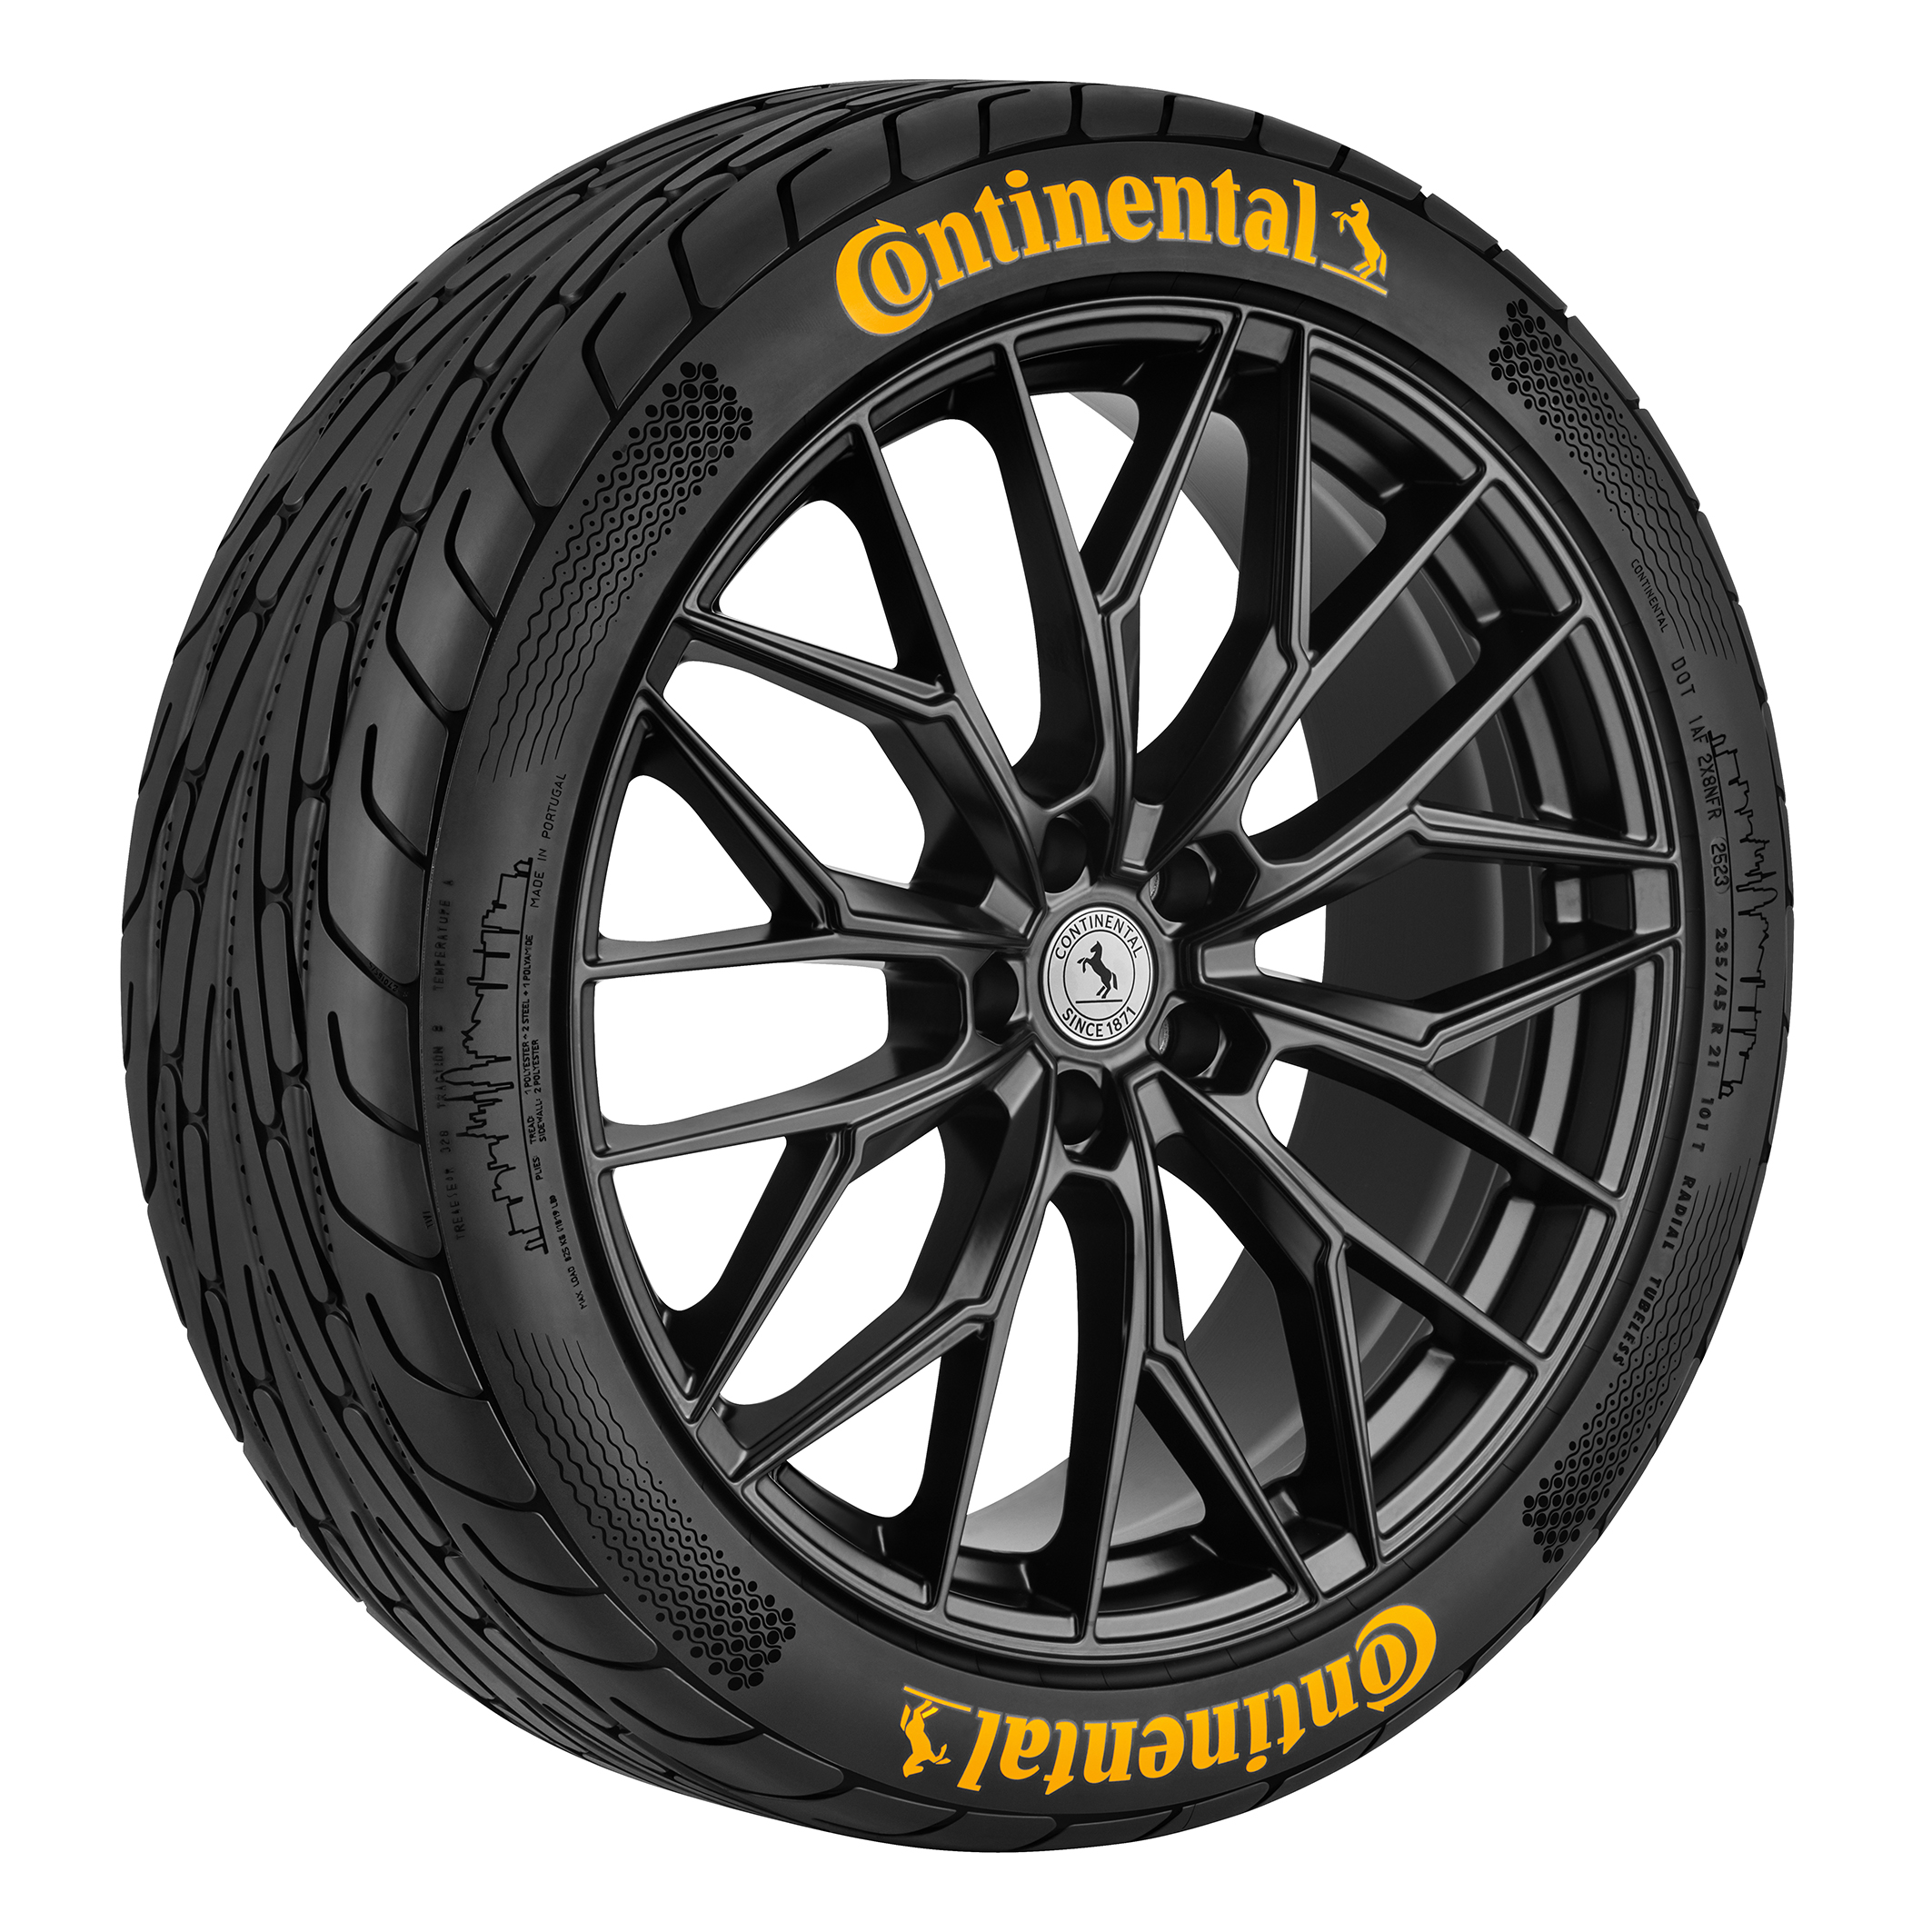 Greater Tire Energy Efficiency in Urban Traffic: Conti CityPlus Concept  Tire Premieres at IAA Mobility - Continental AG